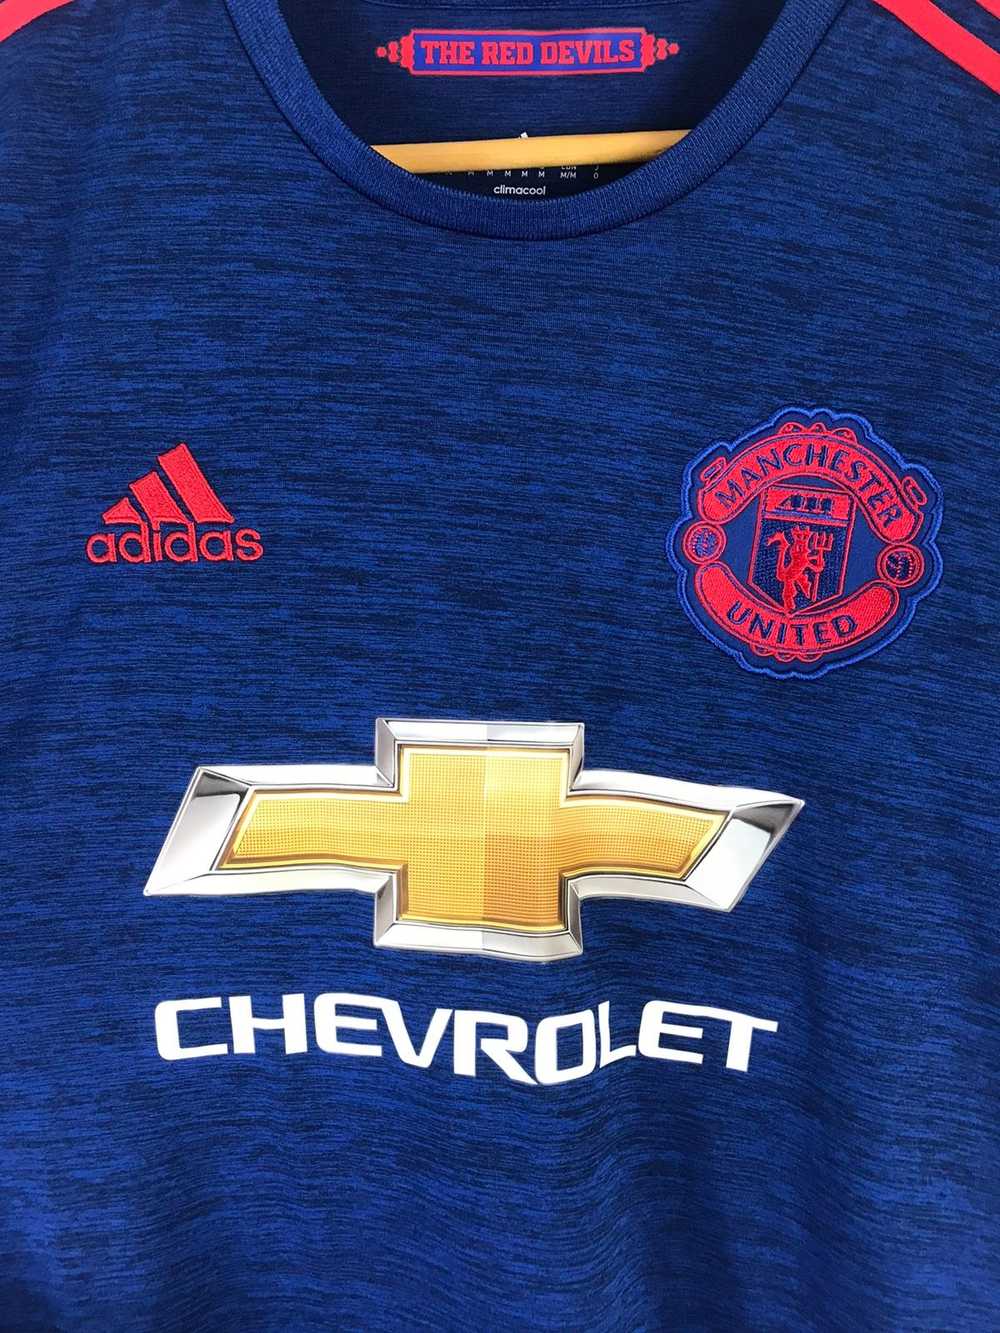 Adidas × Manchester United × Soccer Jersey MANCHE… - image 3